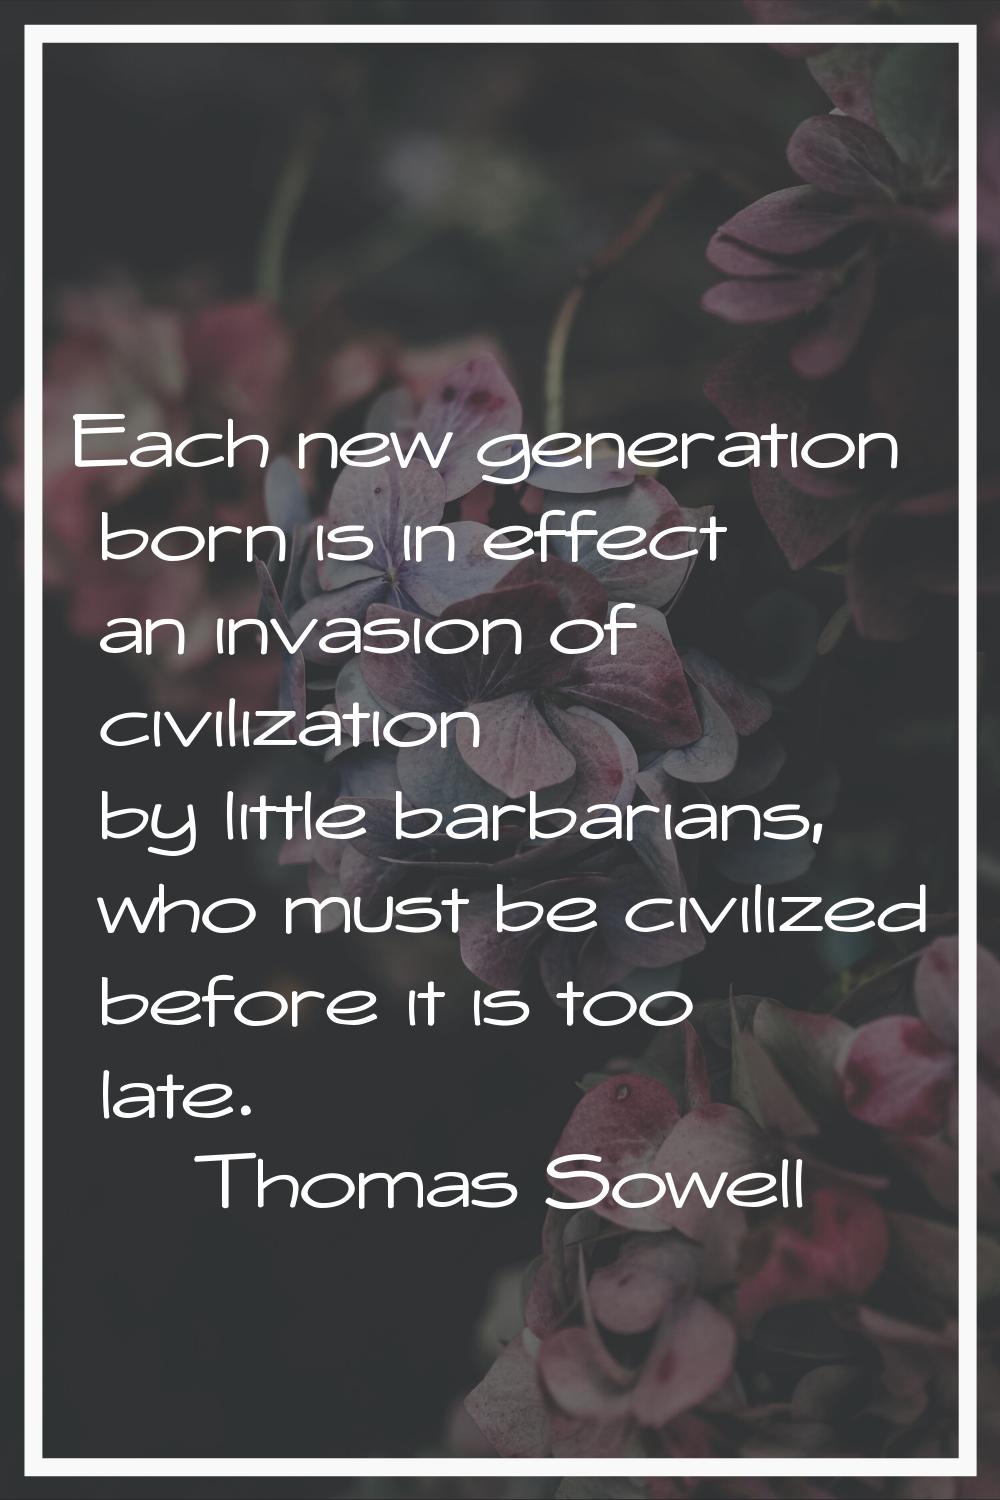 Each new generation born is in effect an invasion of civilization by little barbarians, who must be